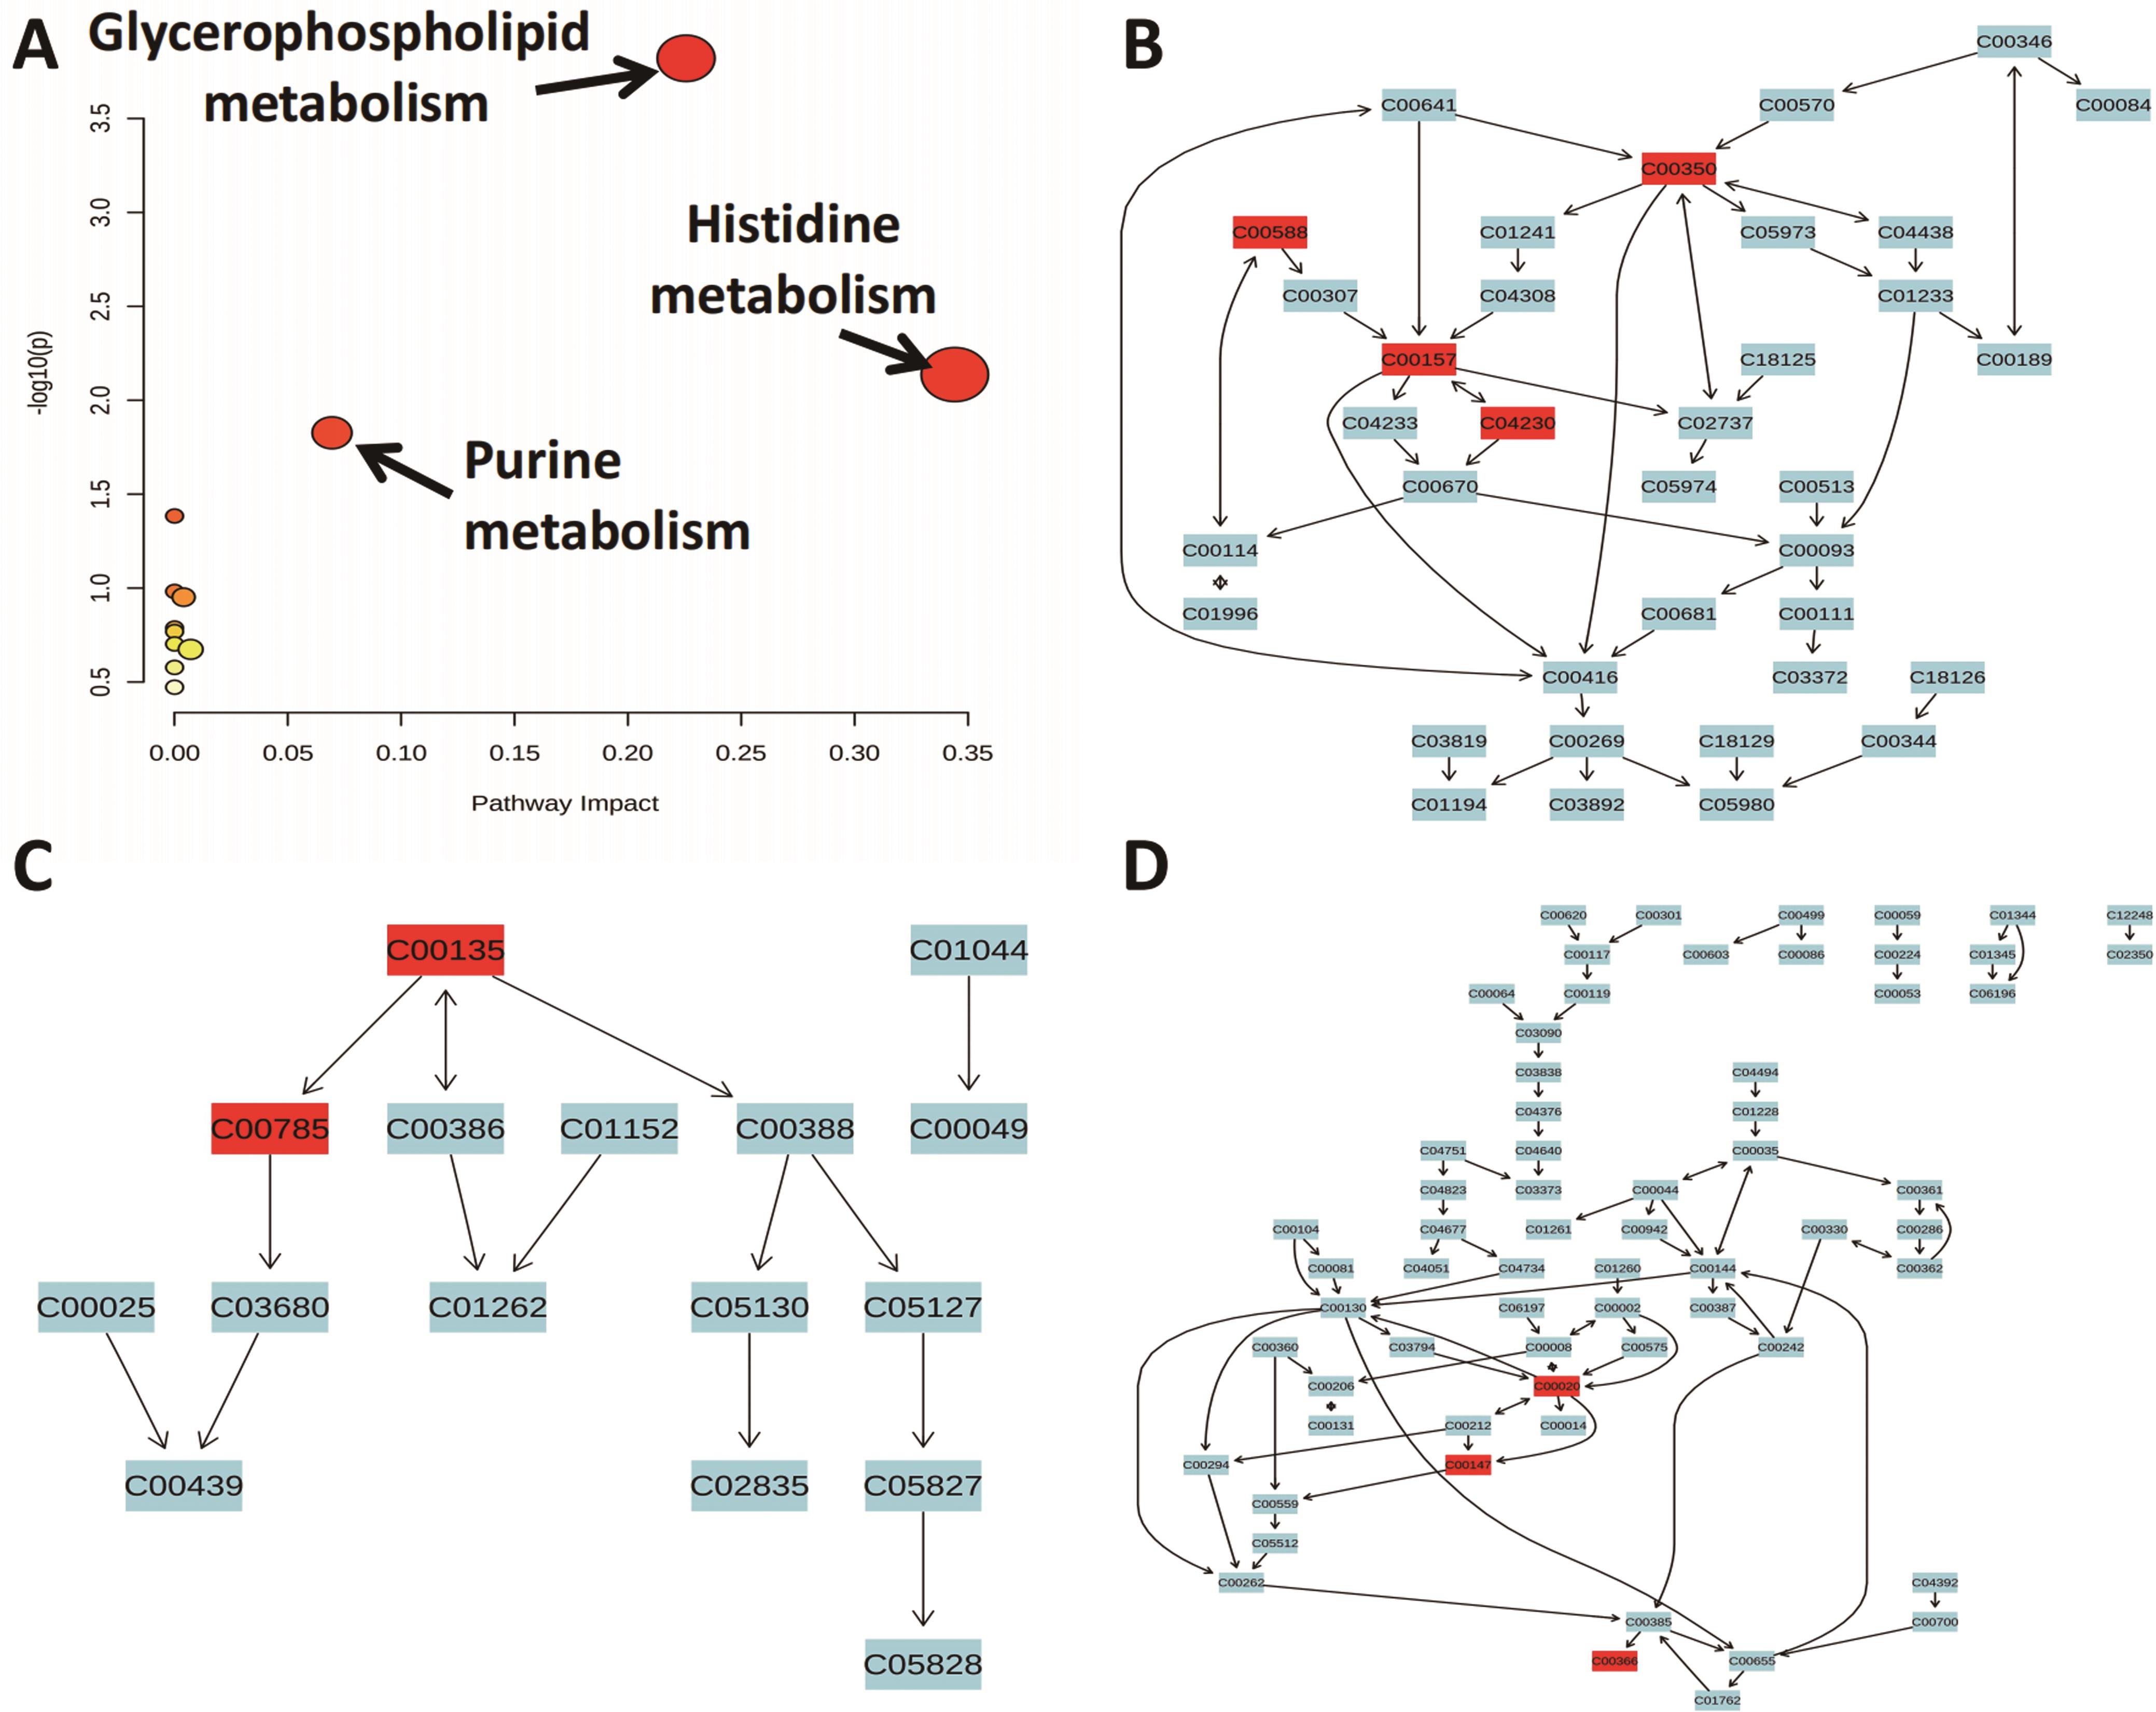 Reanalysis of positive metabolites that associated with EAD in prior metabolomic studies.